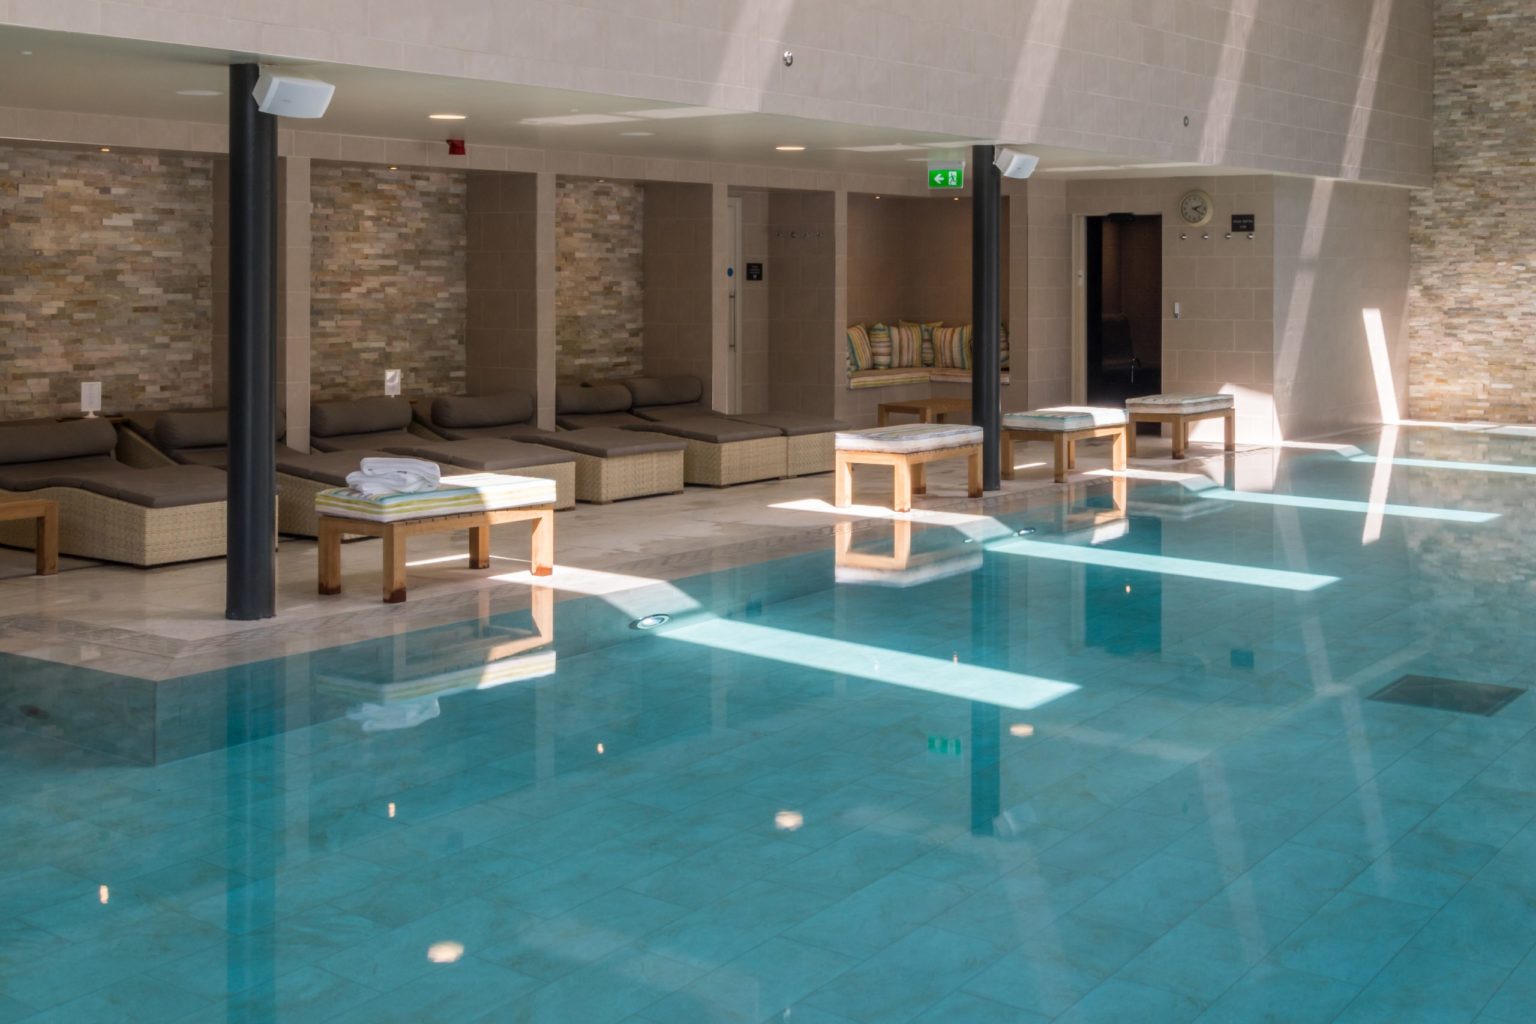 The poolside of the indoor swimming pool at Swinton Country Club and Spa in North Yorkshire